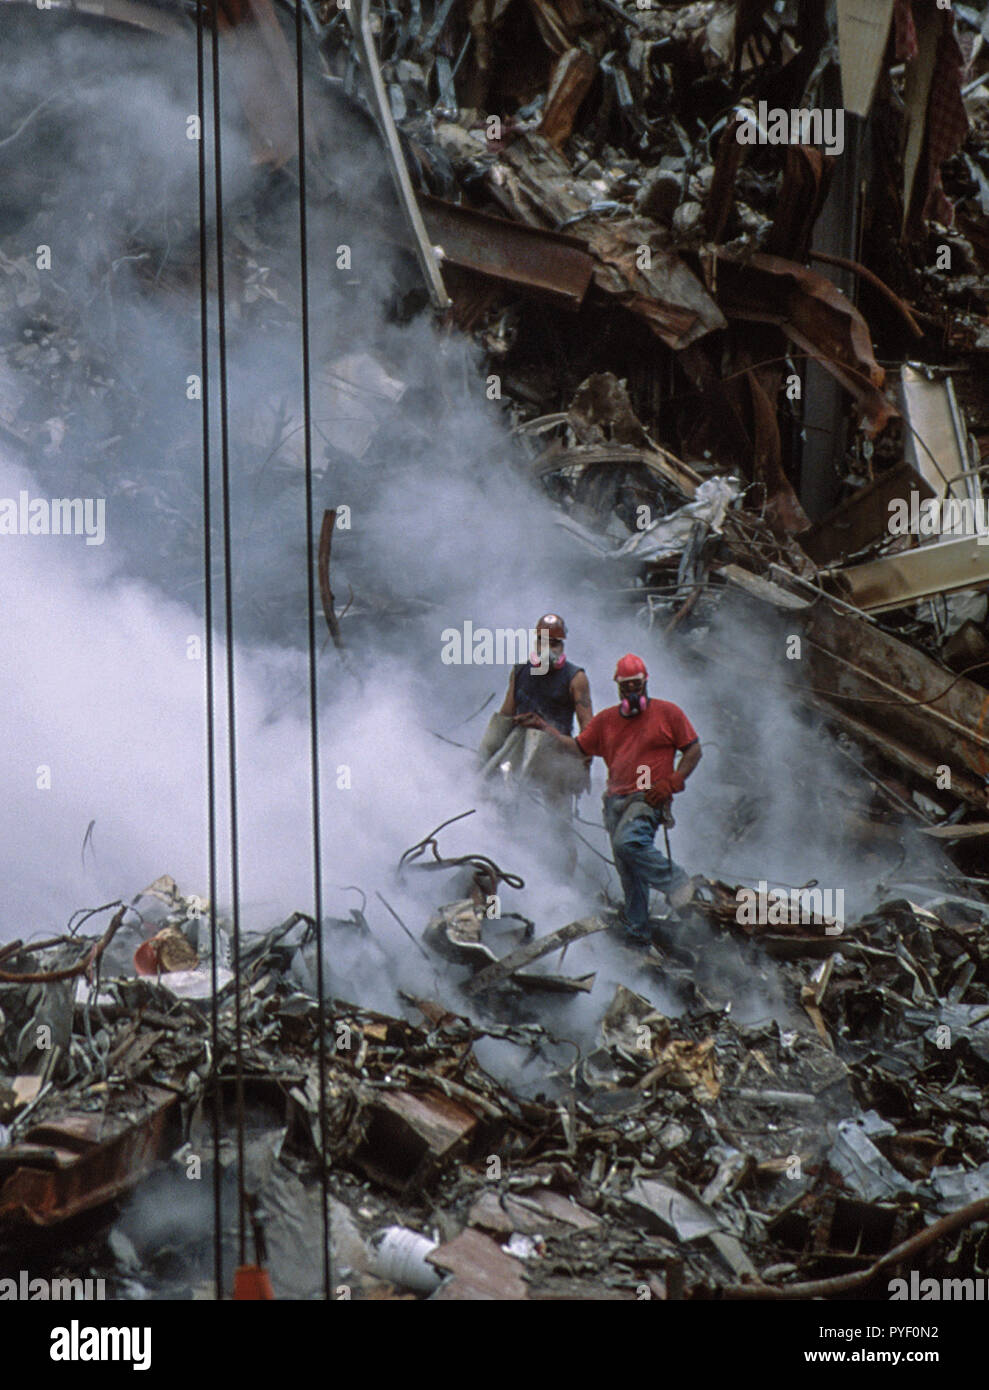 Sep 24, 2001 - Ground Zero, following the 9-11 Terrorist Attacks at the World Trade Center. Photo by Gary Ell Stock Photo